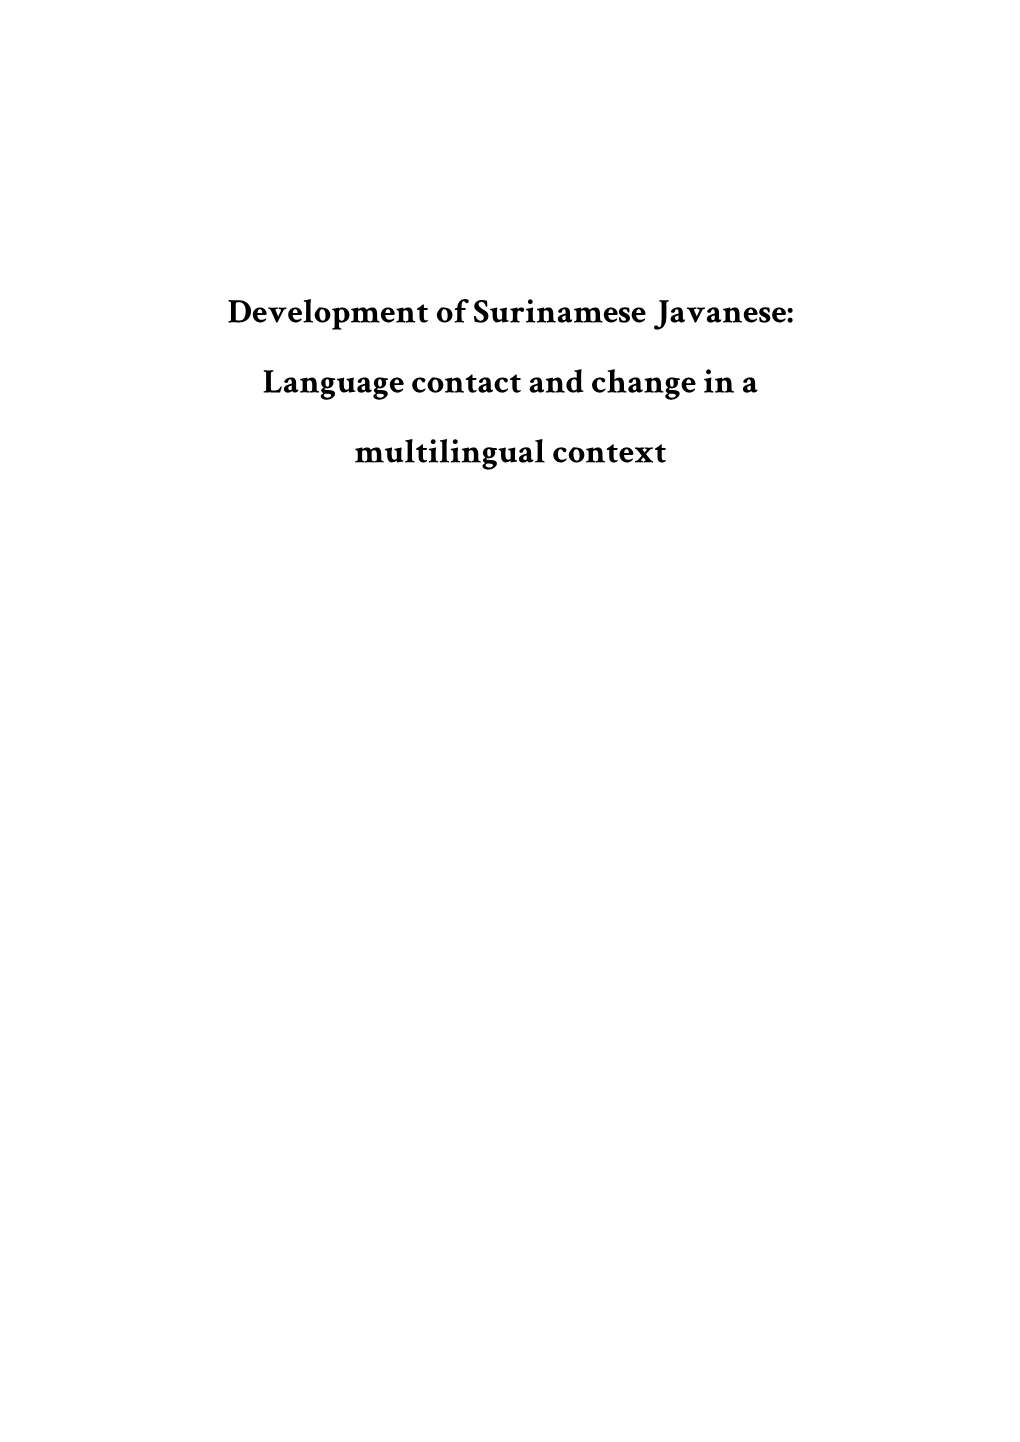 Development of Surinamese Javanese: Language Contact and Change in a Multilingual Context